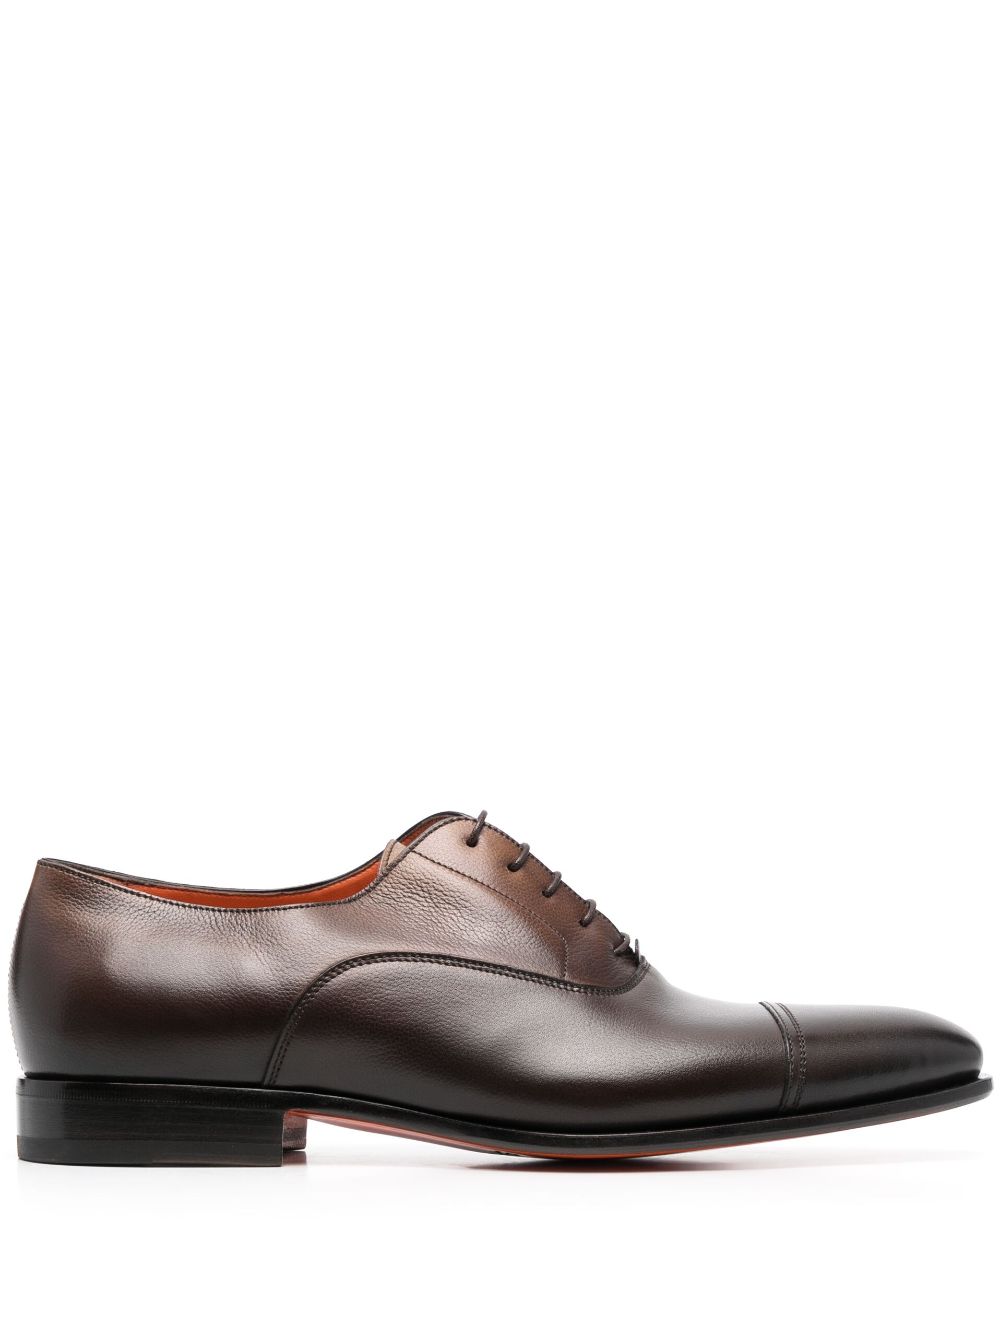 Santoni Leather Oxford Shoes In Brown